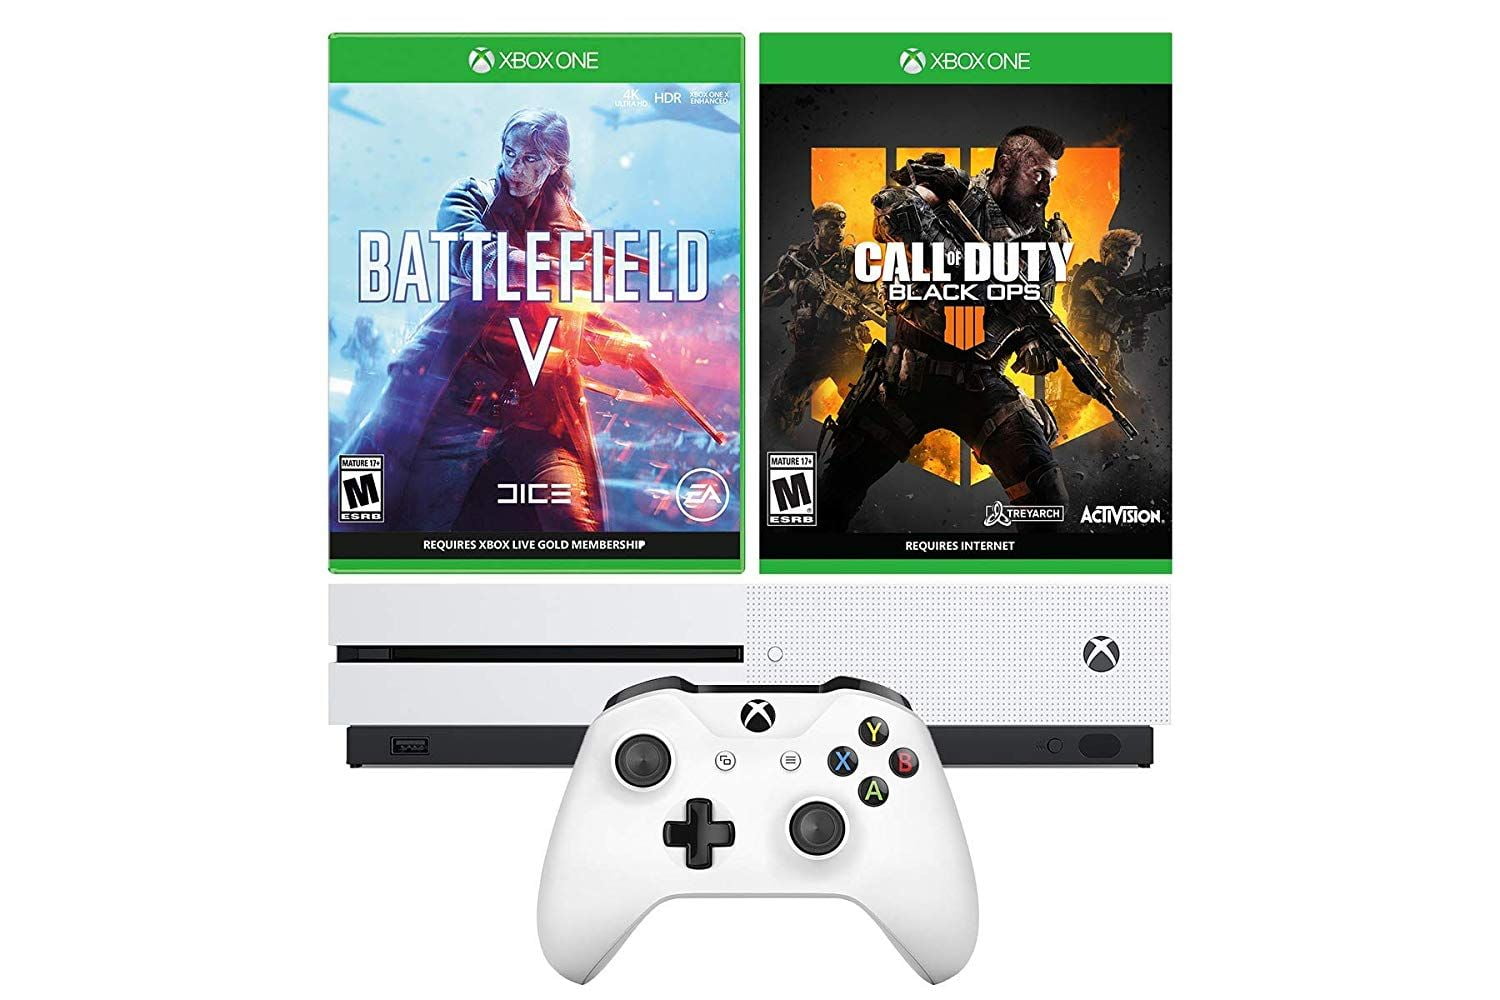 xbox one s call of duty black ops 4 bundle